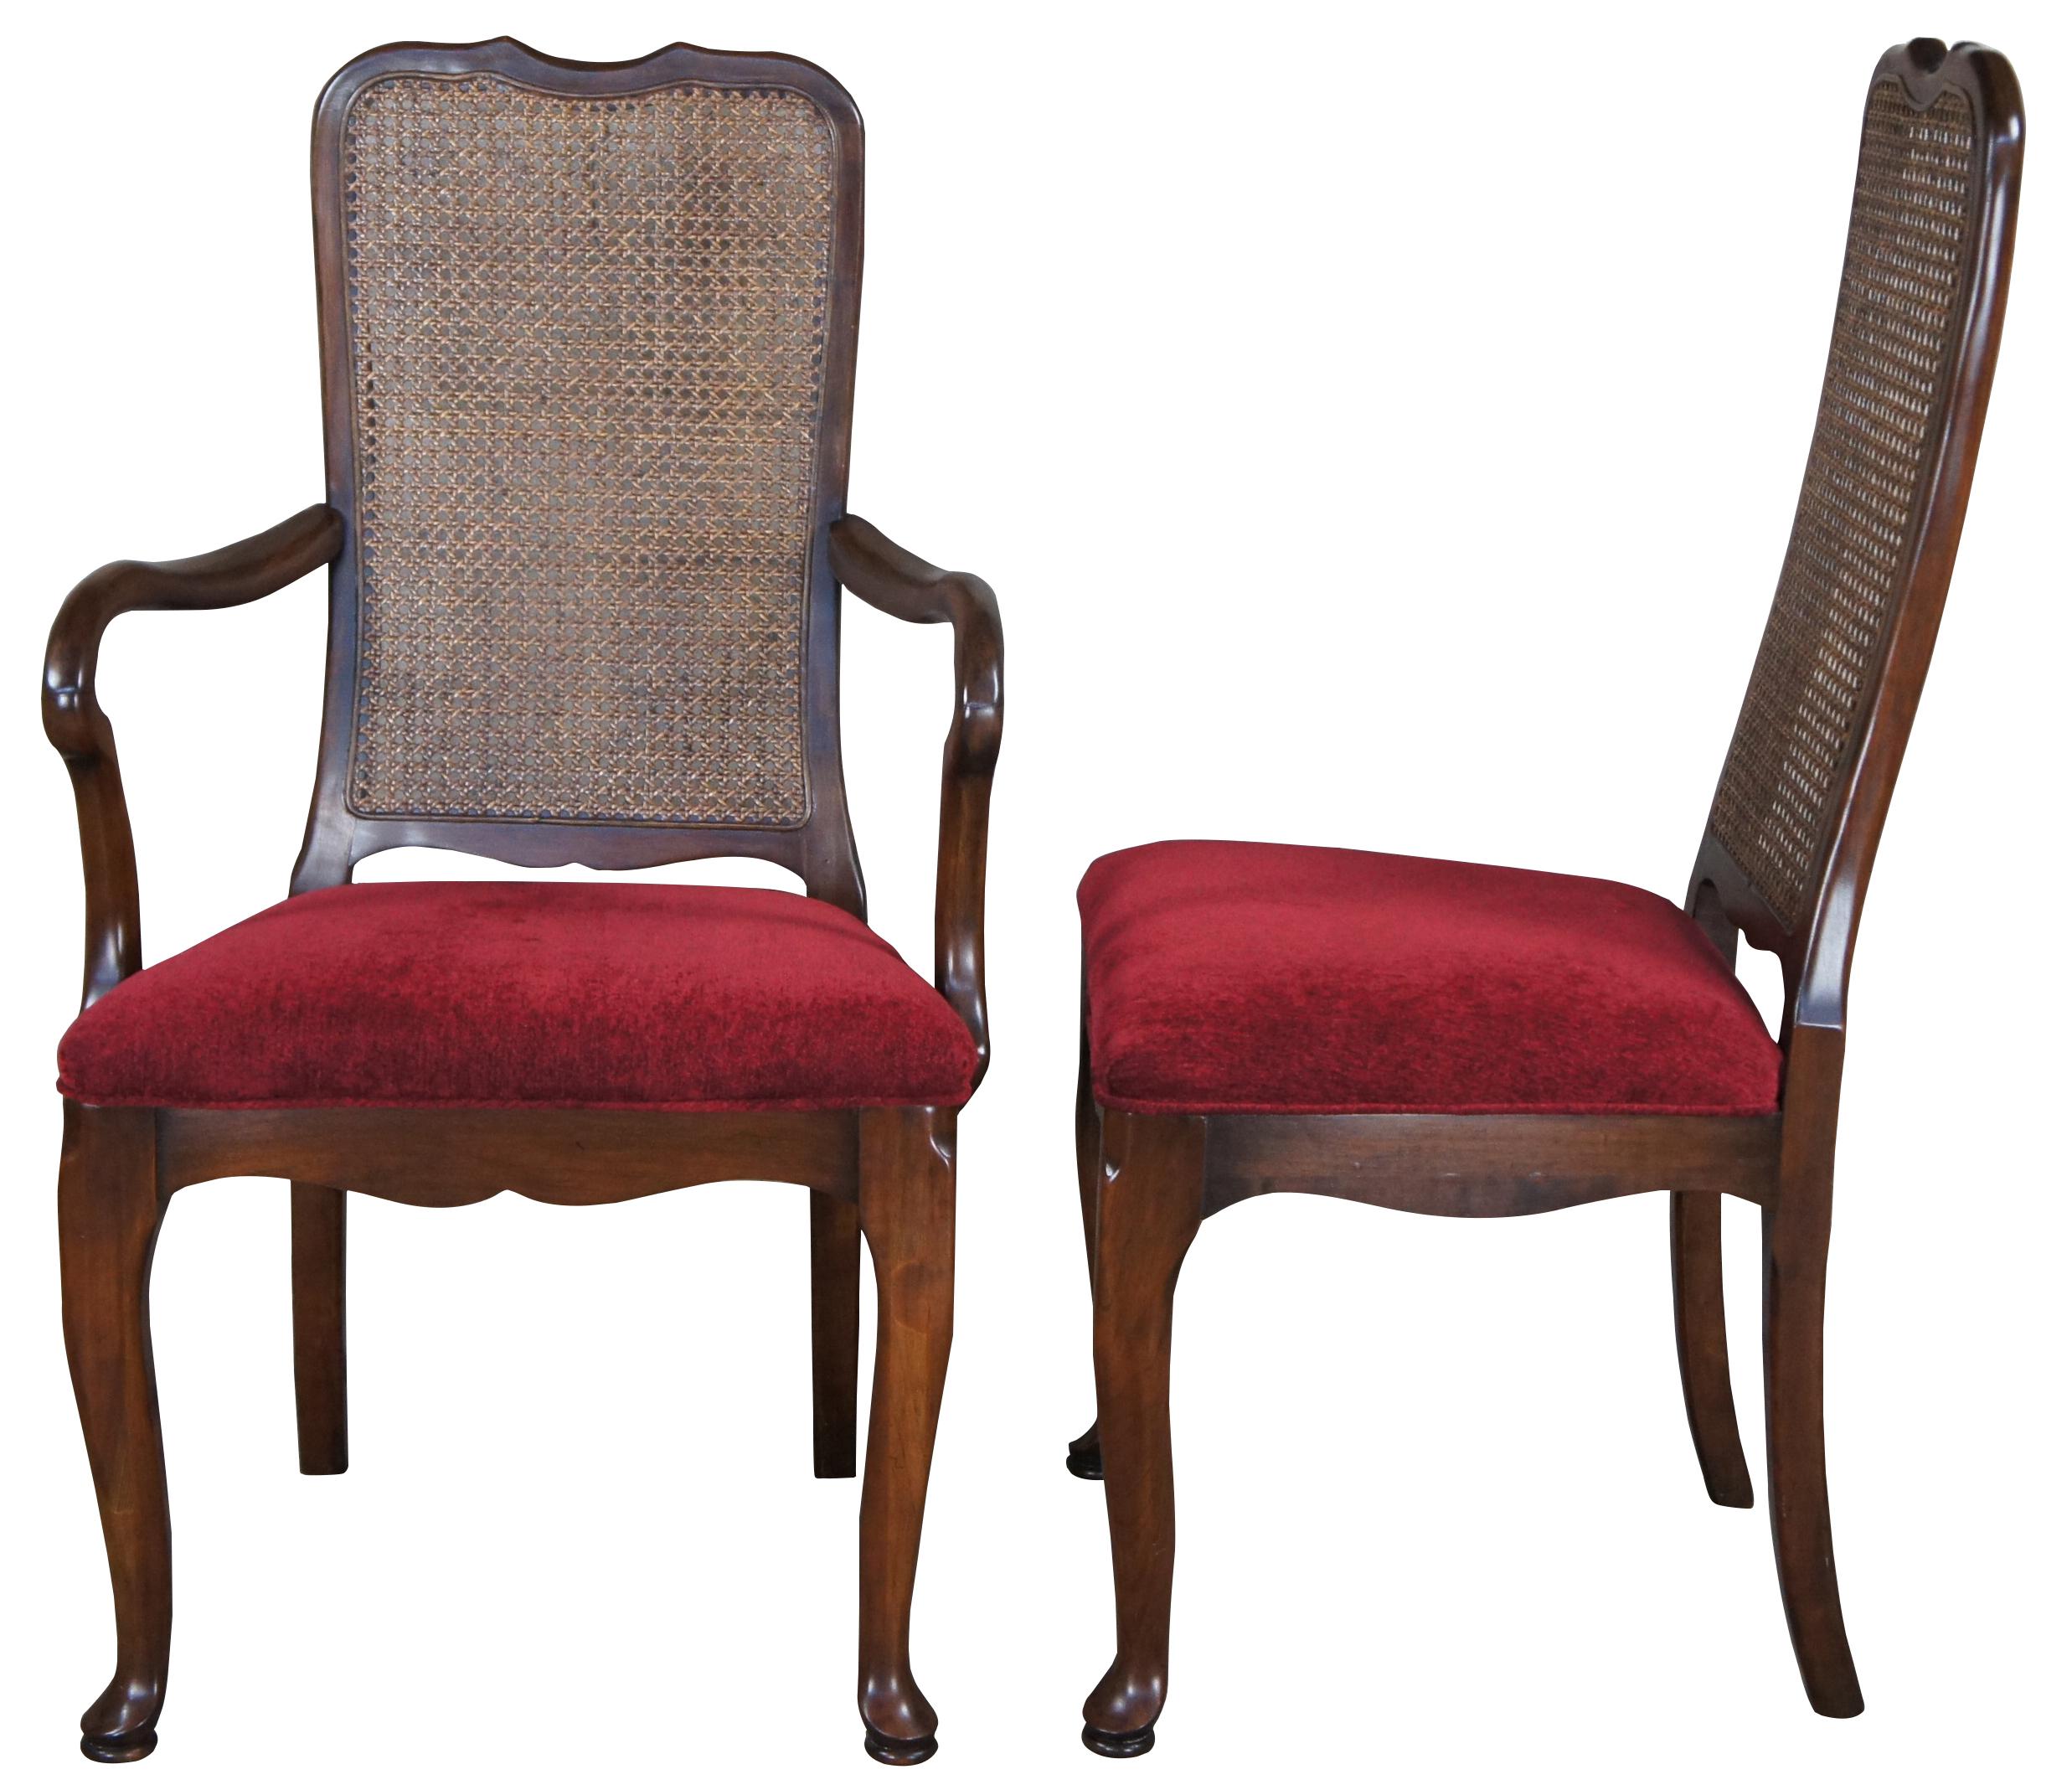 Six vintage dining chairs by Harden Furniture, circa 1958. Made of solid cherry featuring a crest rail leading to caned backs, red upholstery and cabriole leds leading to pad feet. Includes a serpentine seat apron and chamfered corners just beneath